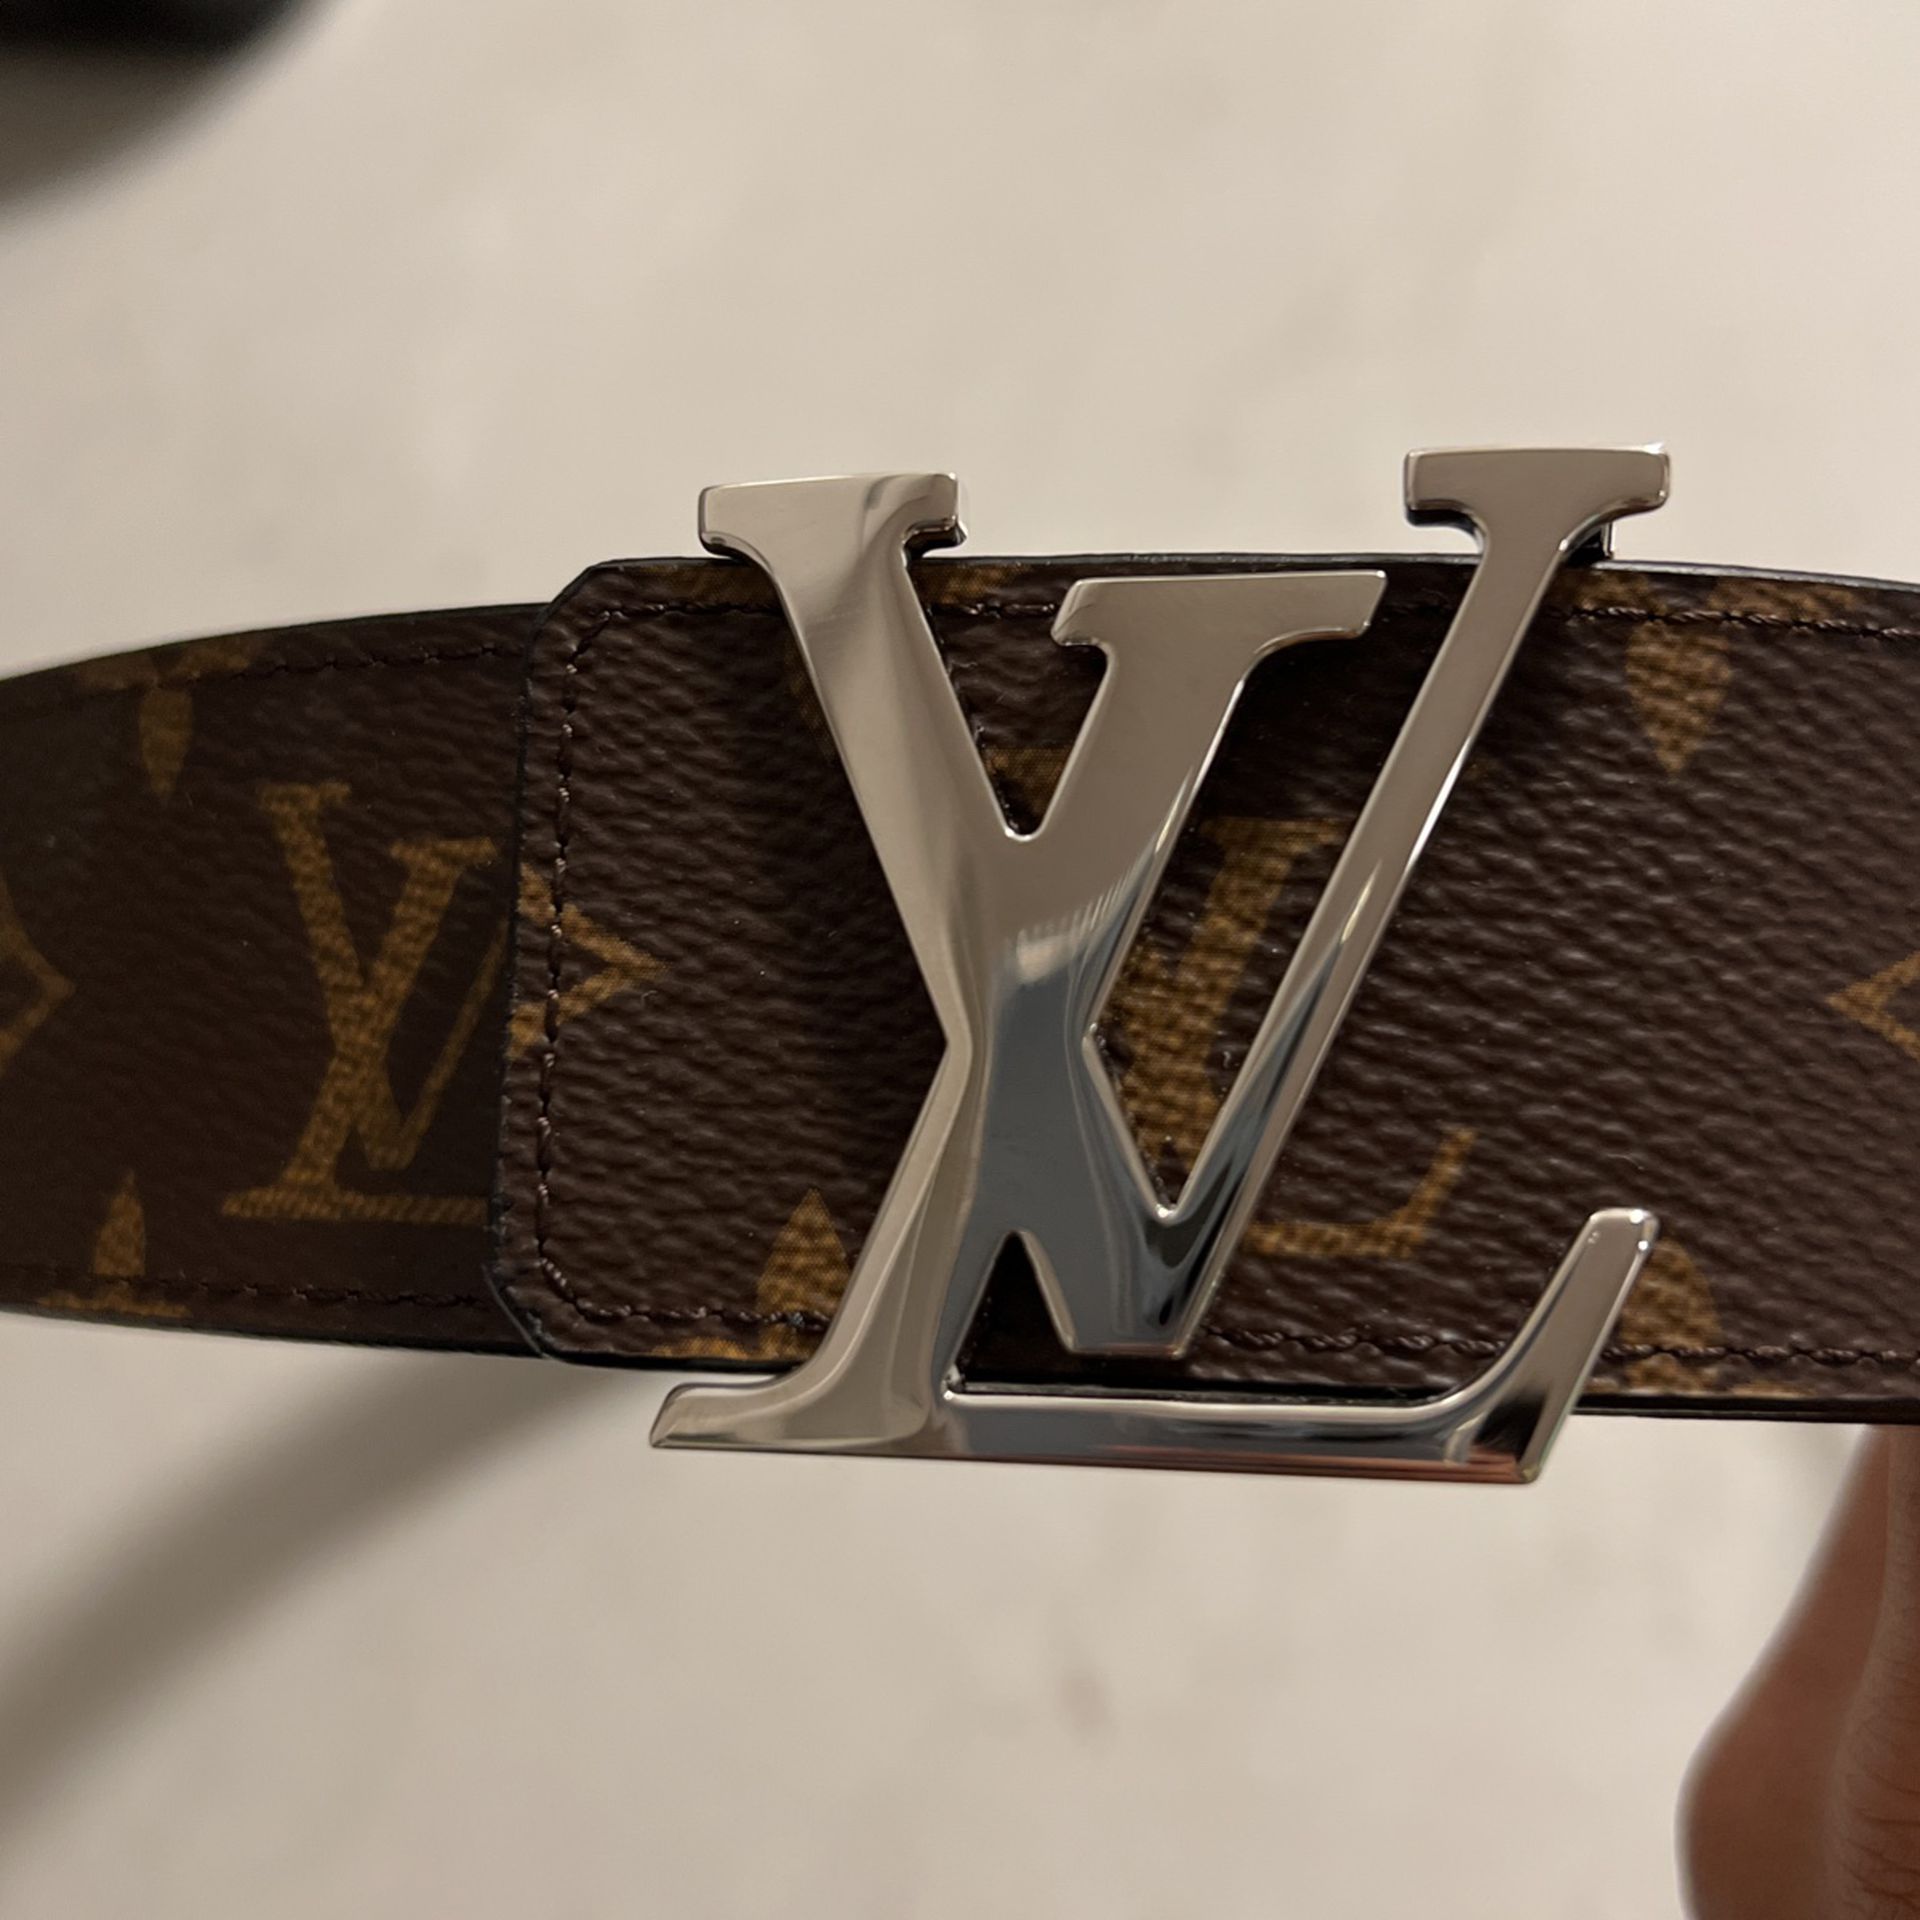 Louis Vuitton Belt Leather 90” Purchased From Louis Vuitton